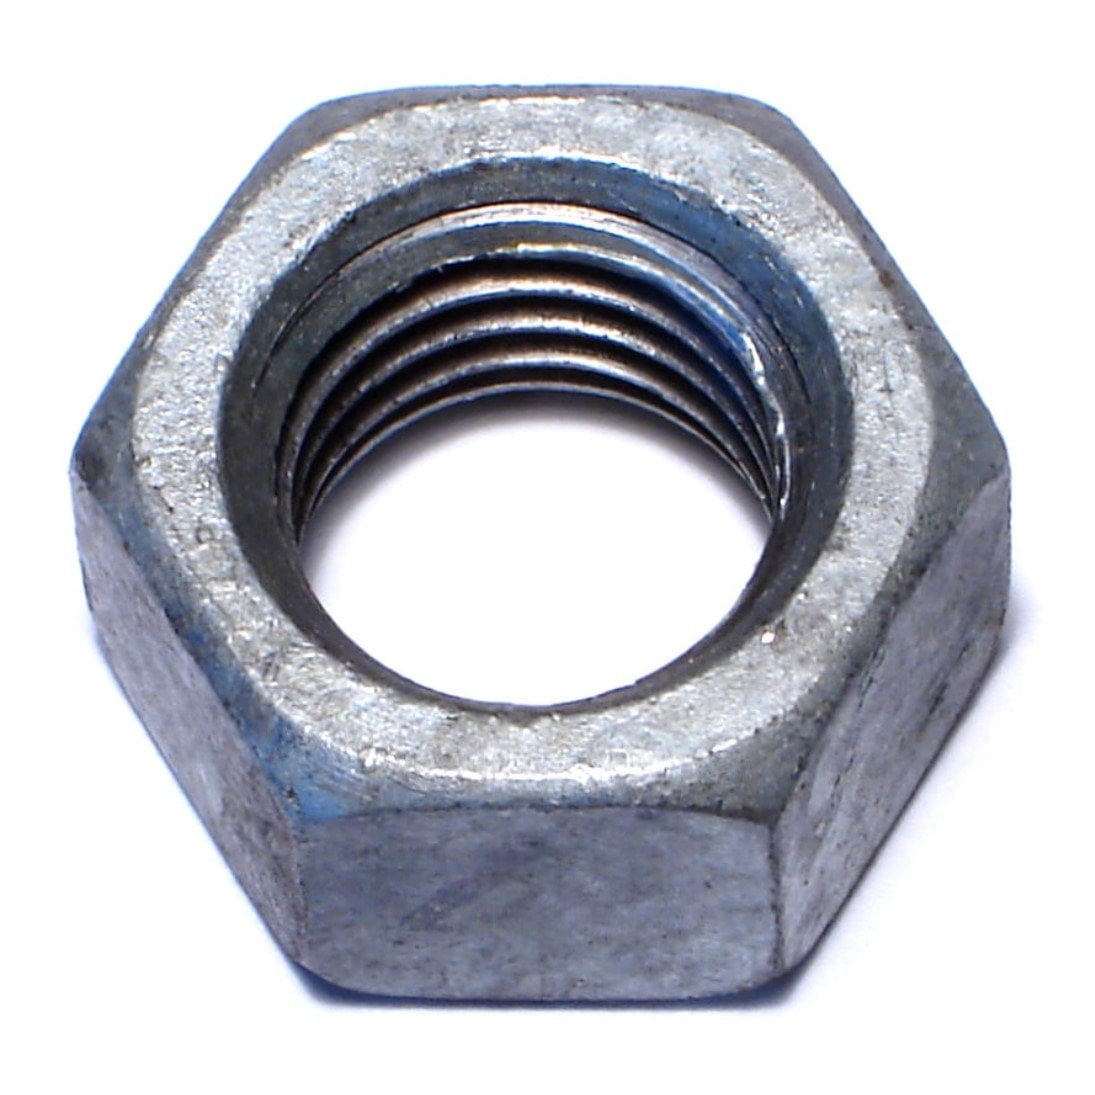 25 5/8-11 Hot Dipped Galvanized Finish Hex Nut 